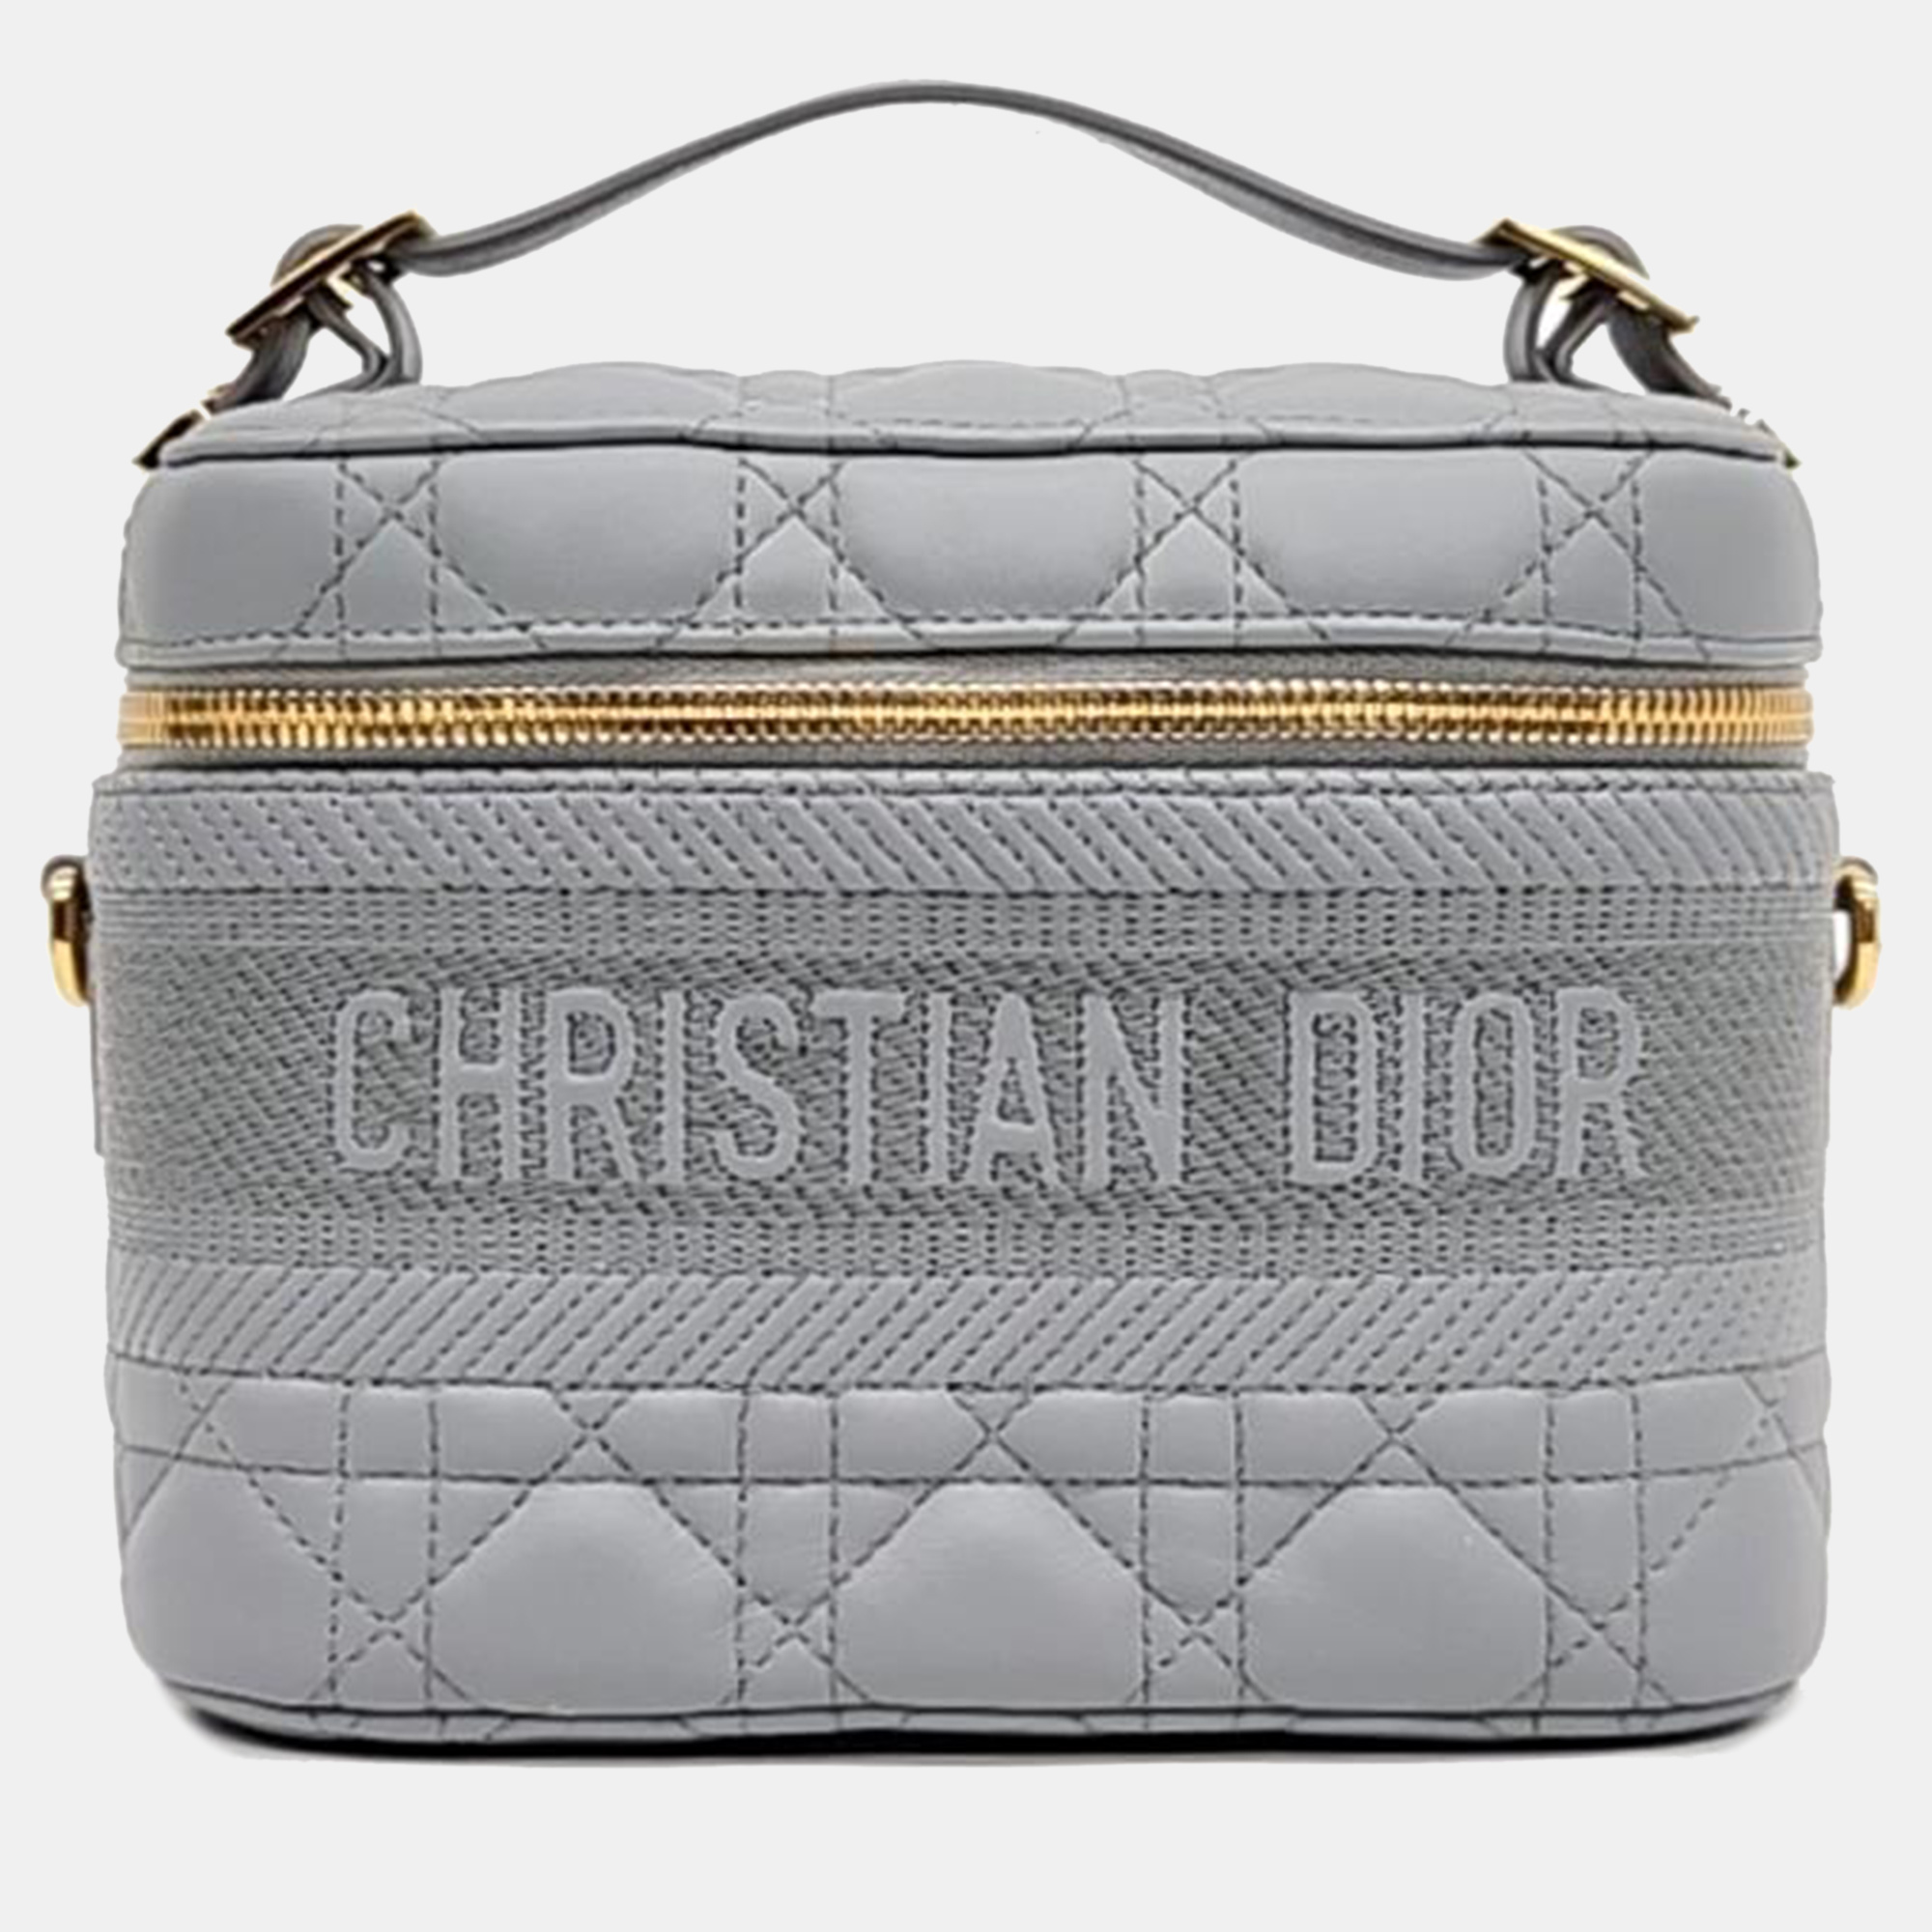 Dior gray cannage leather travel vanity bag